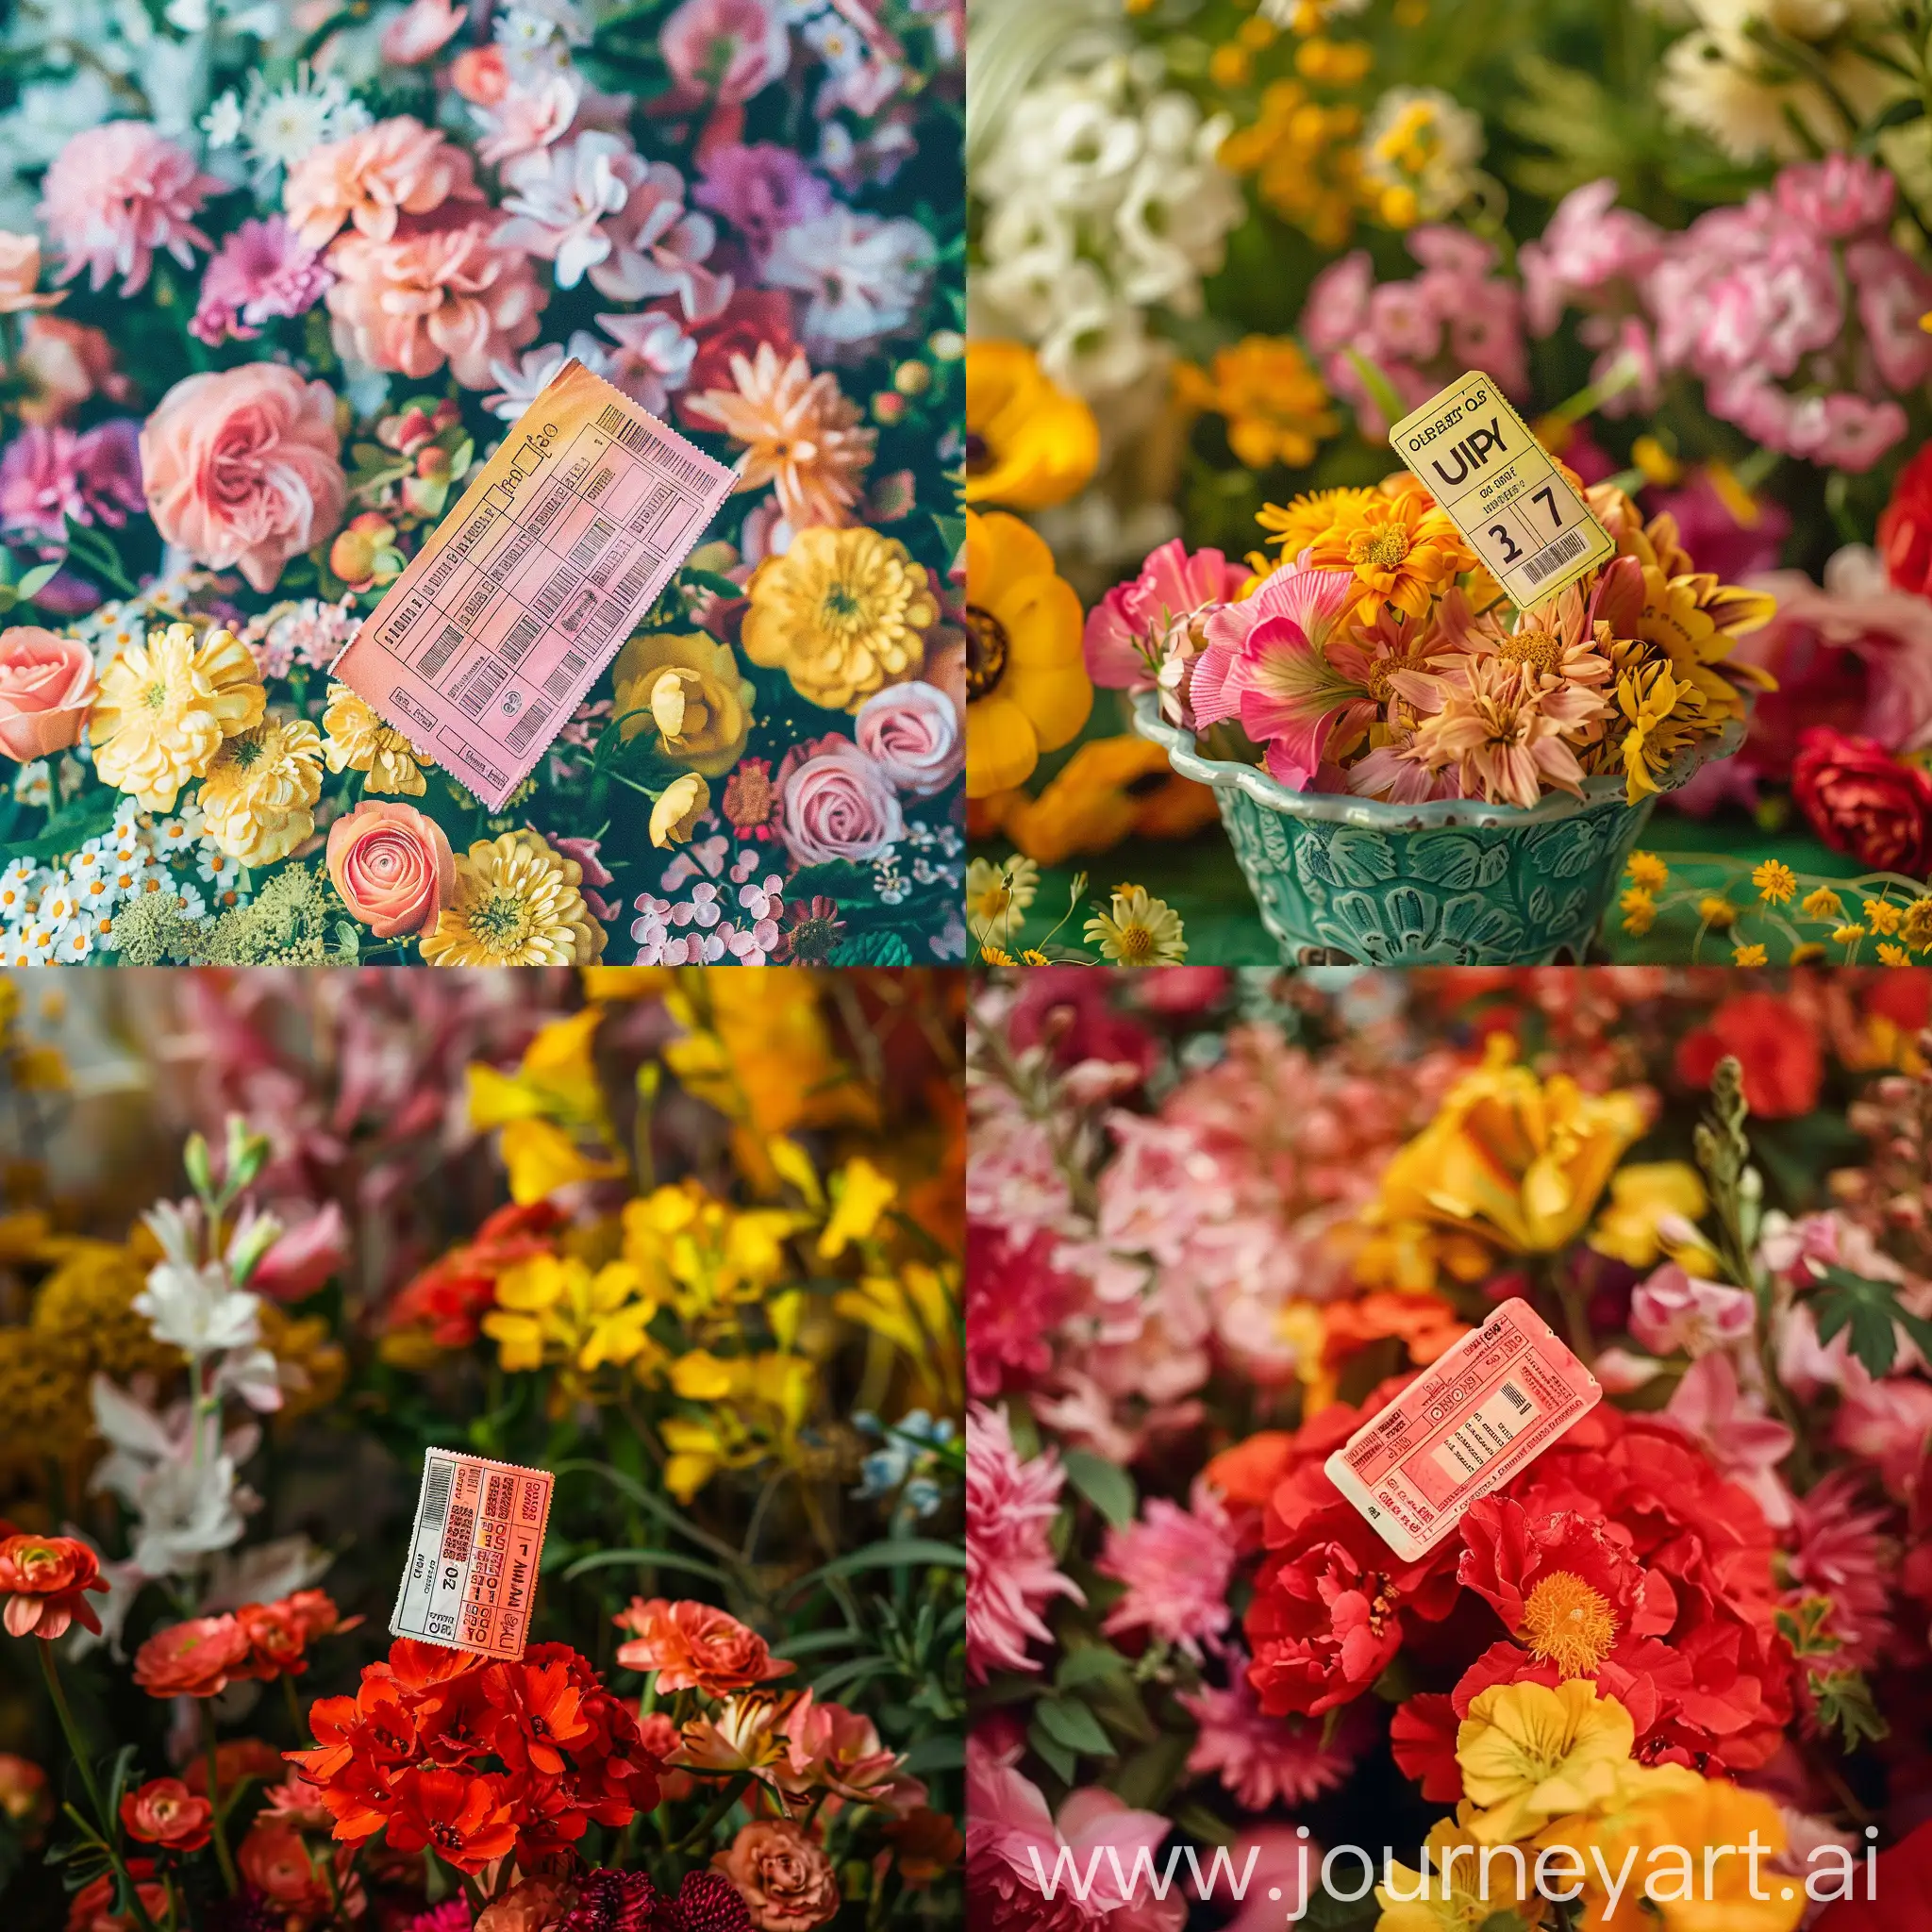 Fortunate-Lottery-Ticket-Surrounded-by-Vibrant-Flowers